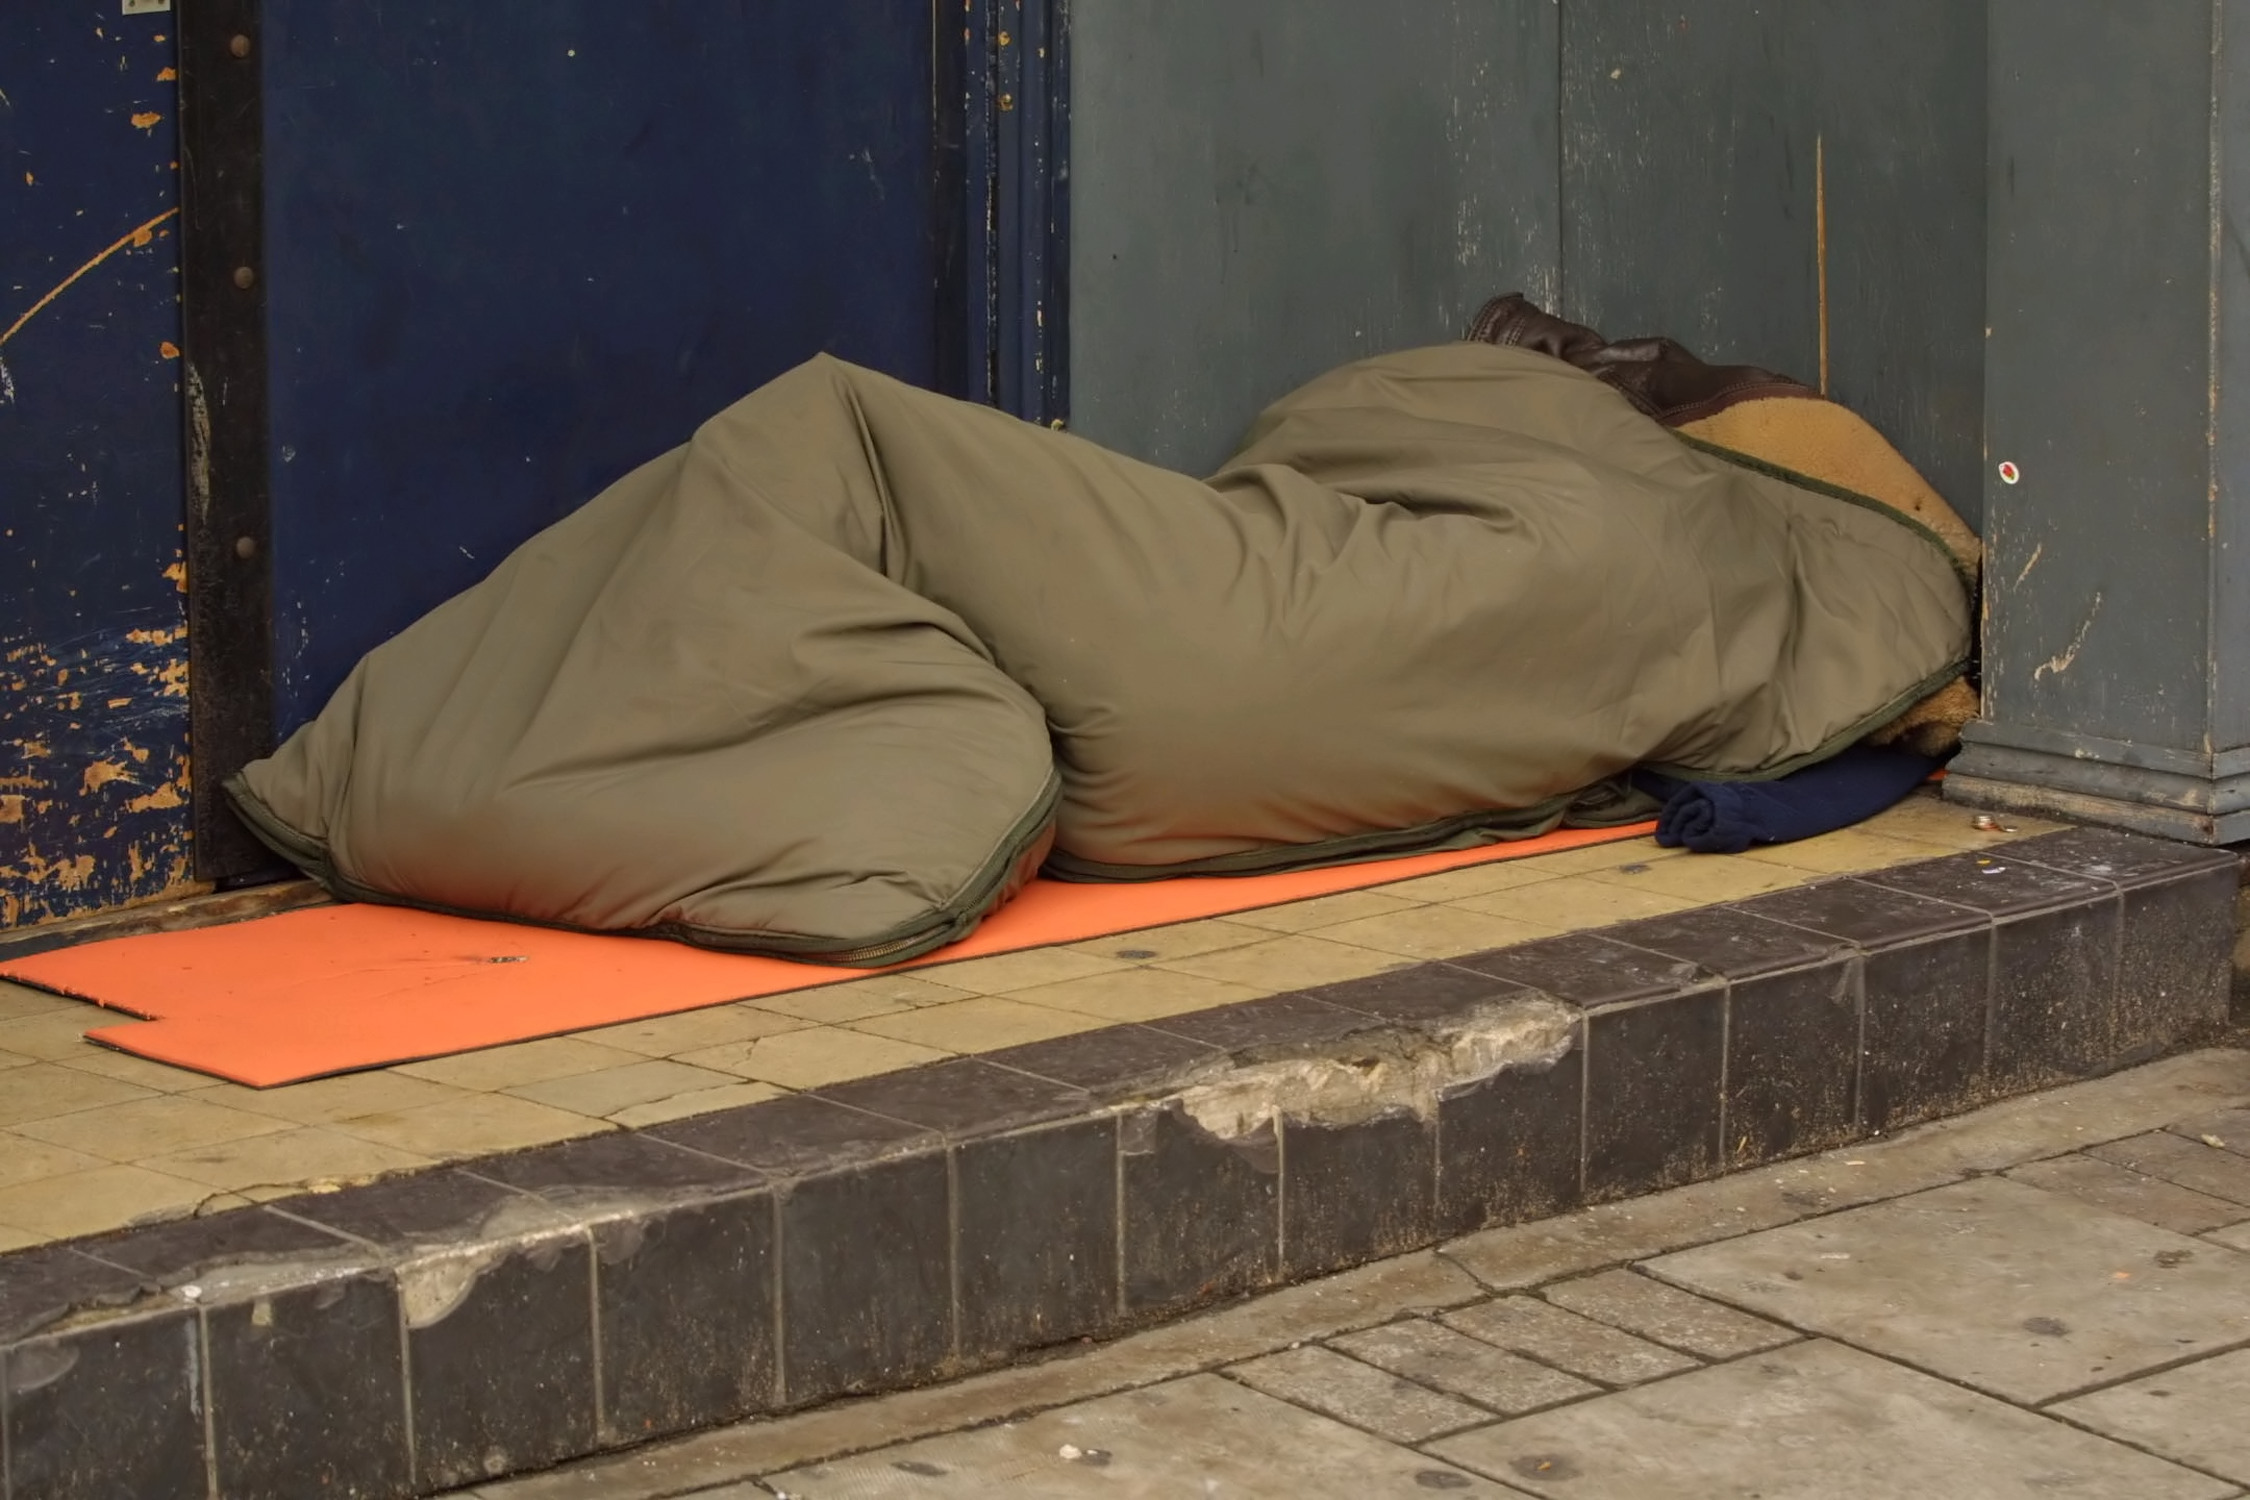 Rough sleeper work - the story of 'A'